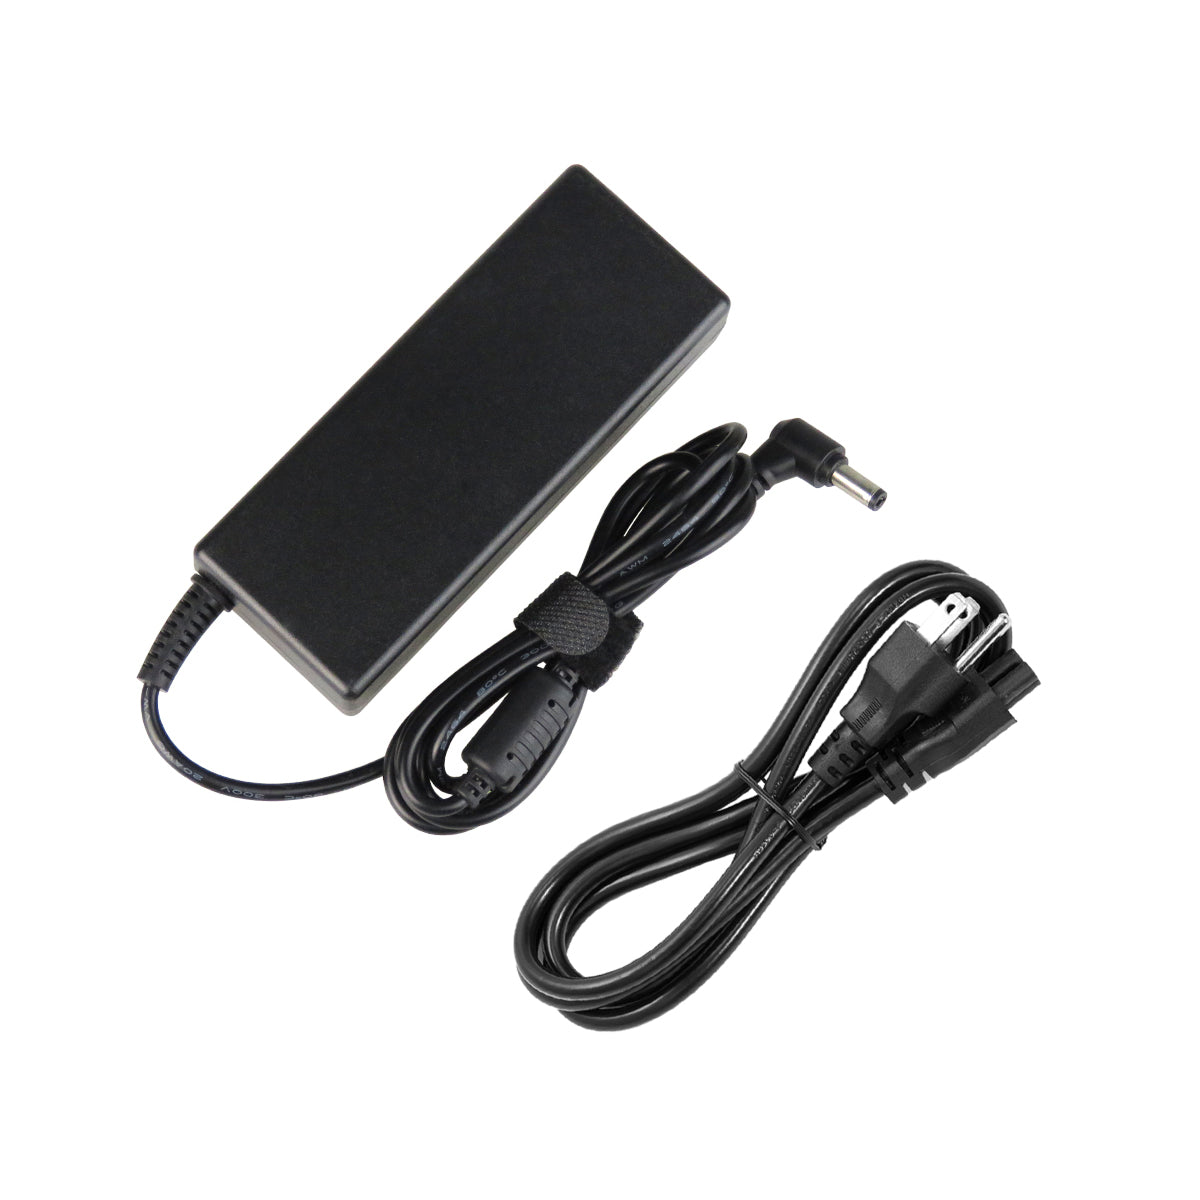 AC Adapter Charger for ASUS G55VW Notebook.